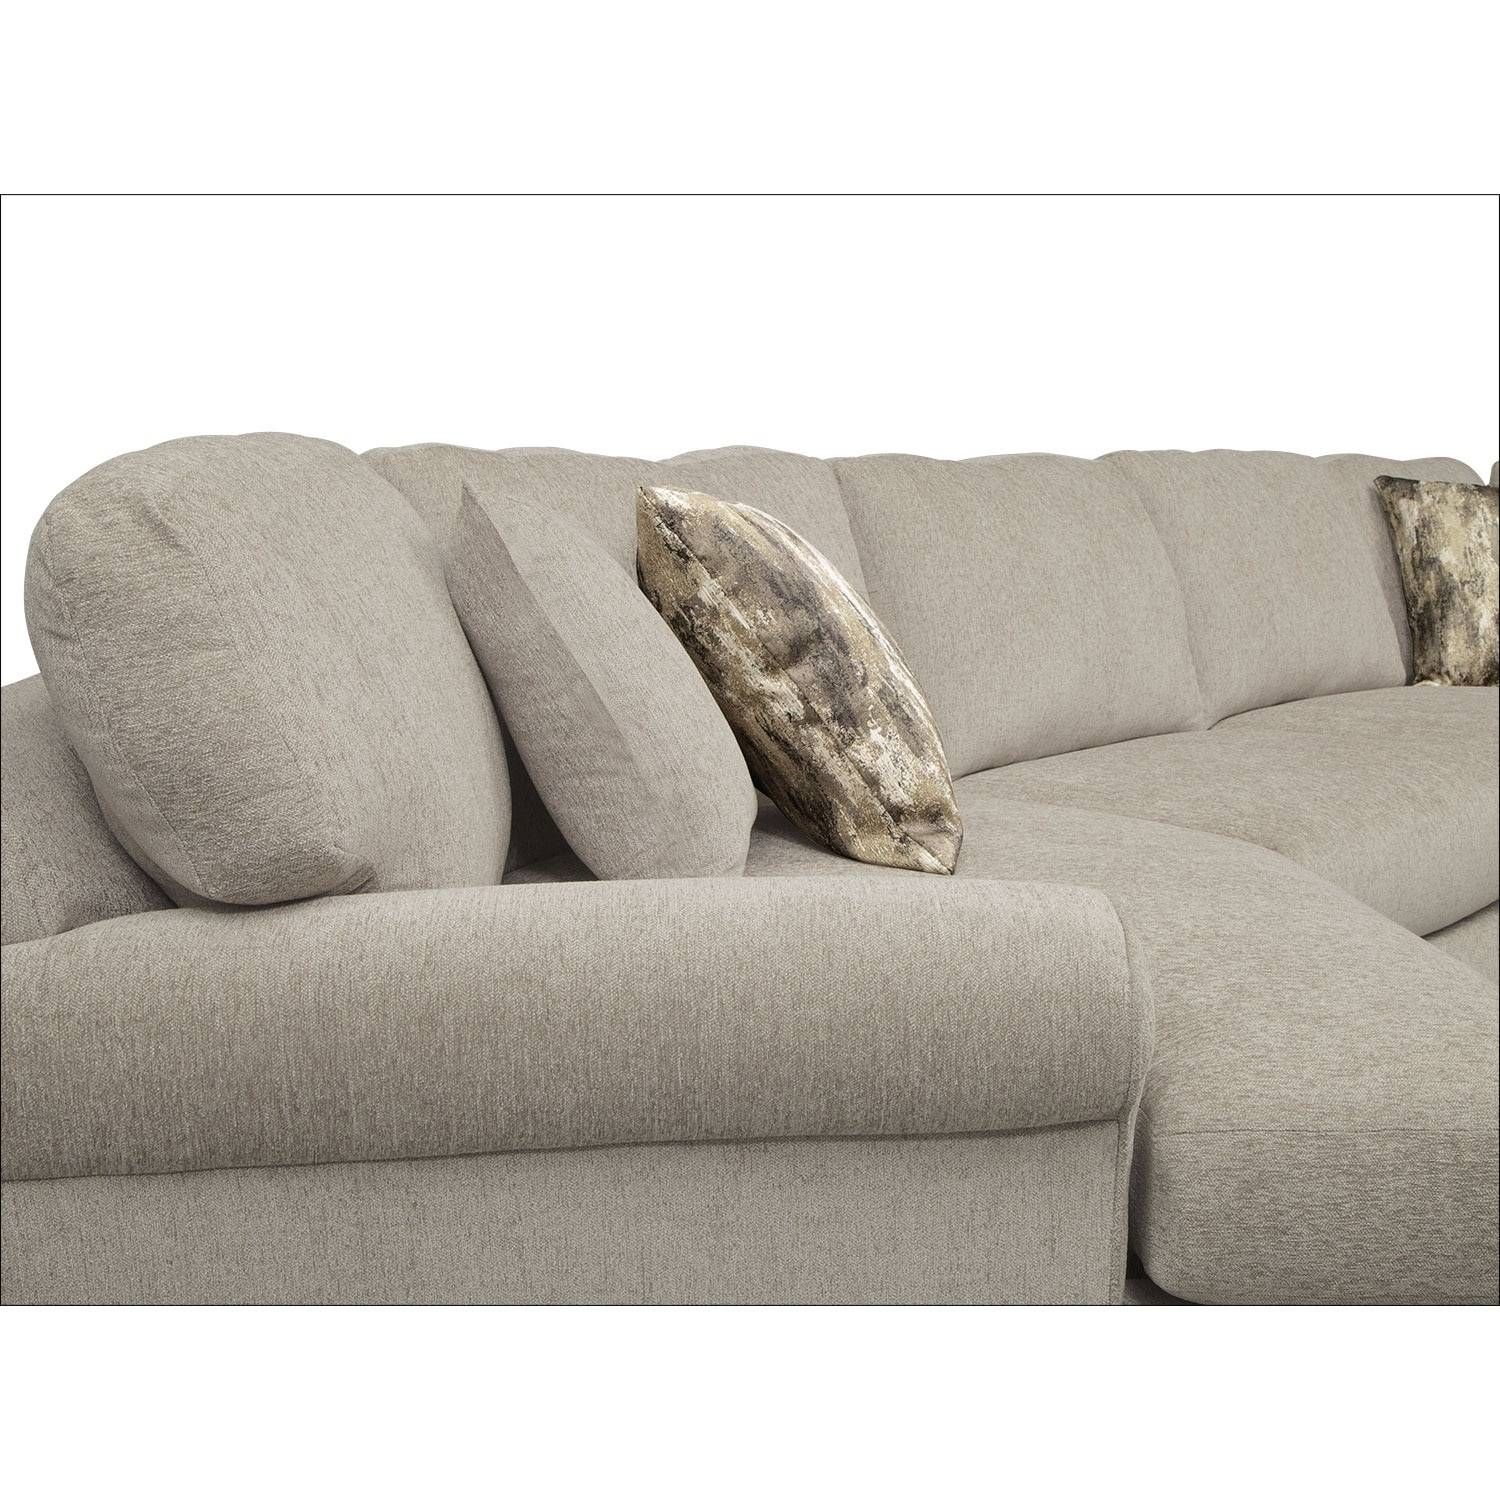 Karma 3 Piece Sectional With Left Facing Cuddler – Mink | Value Within Cuddler Sectional Sofa (View 24 of 30)